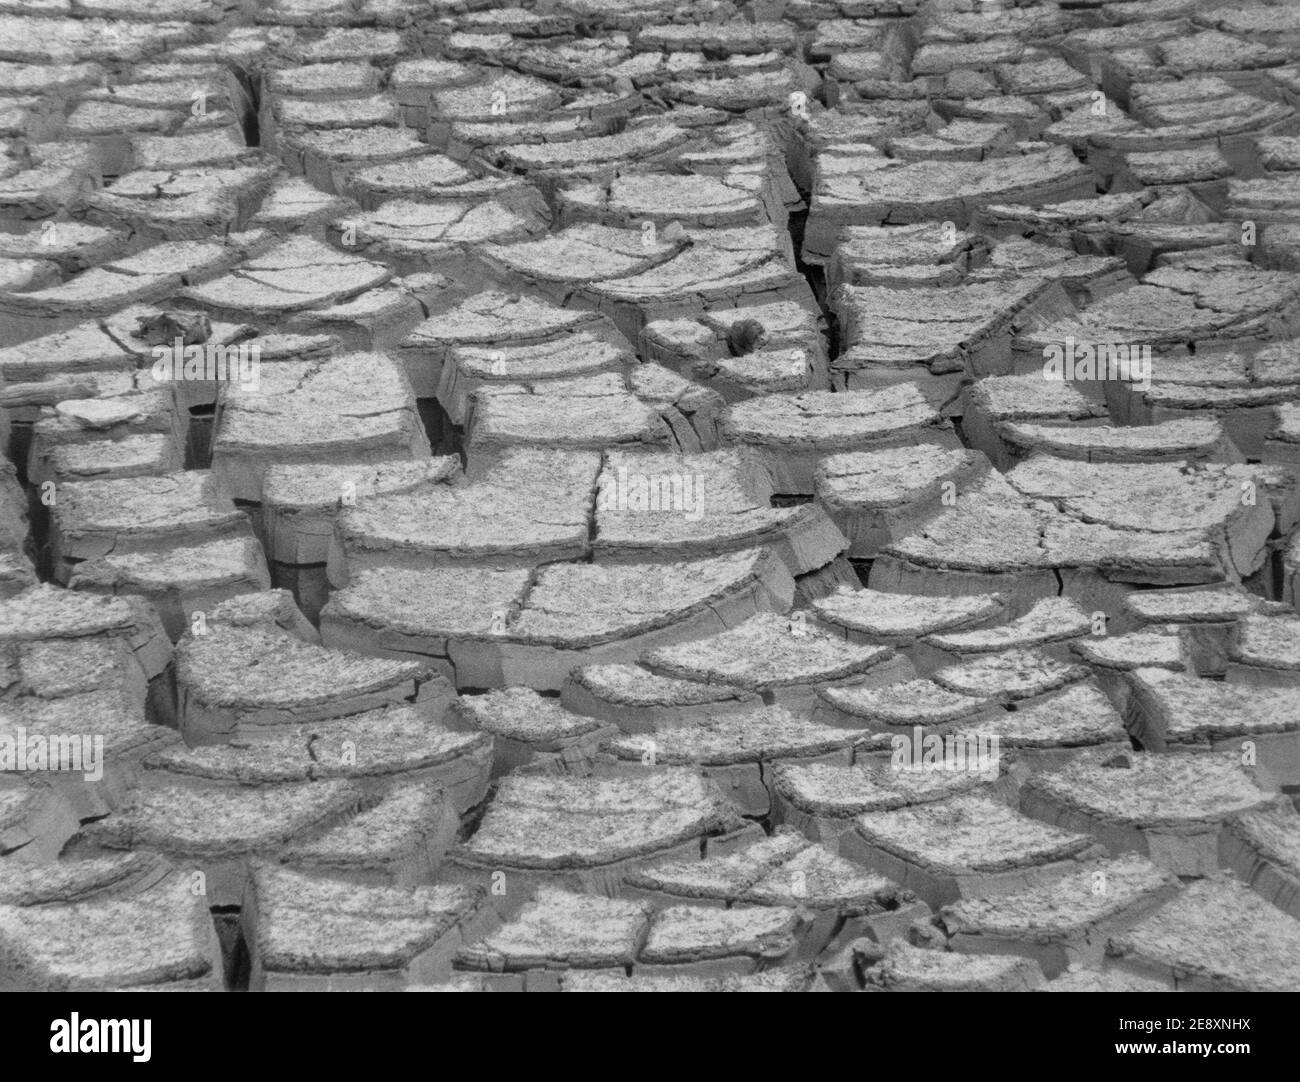 Cracked earth during a drought in South Florida. Stock Photo